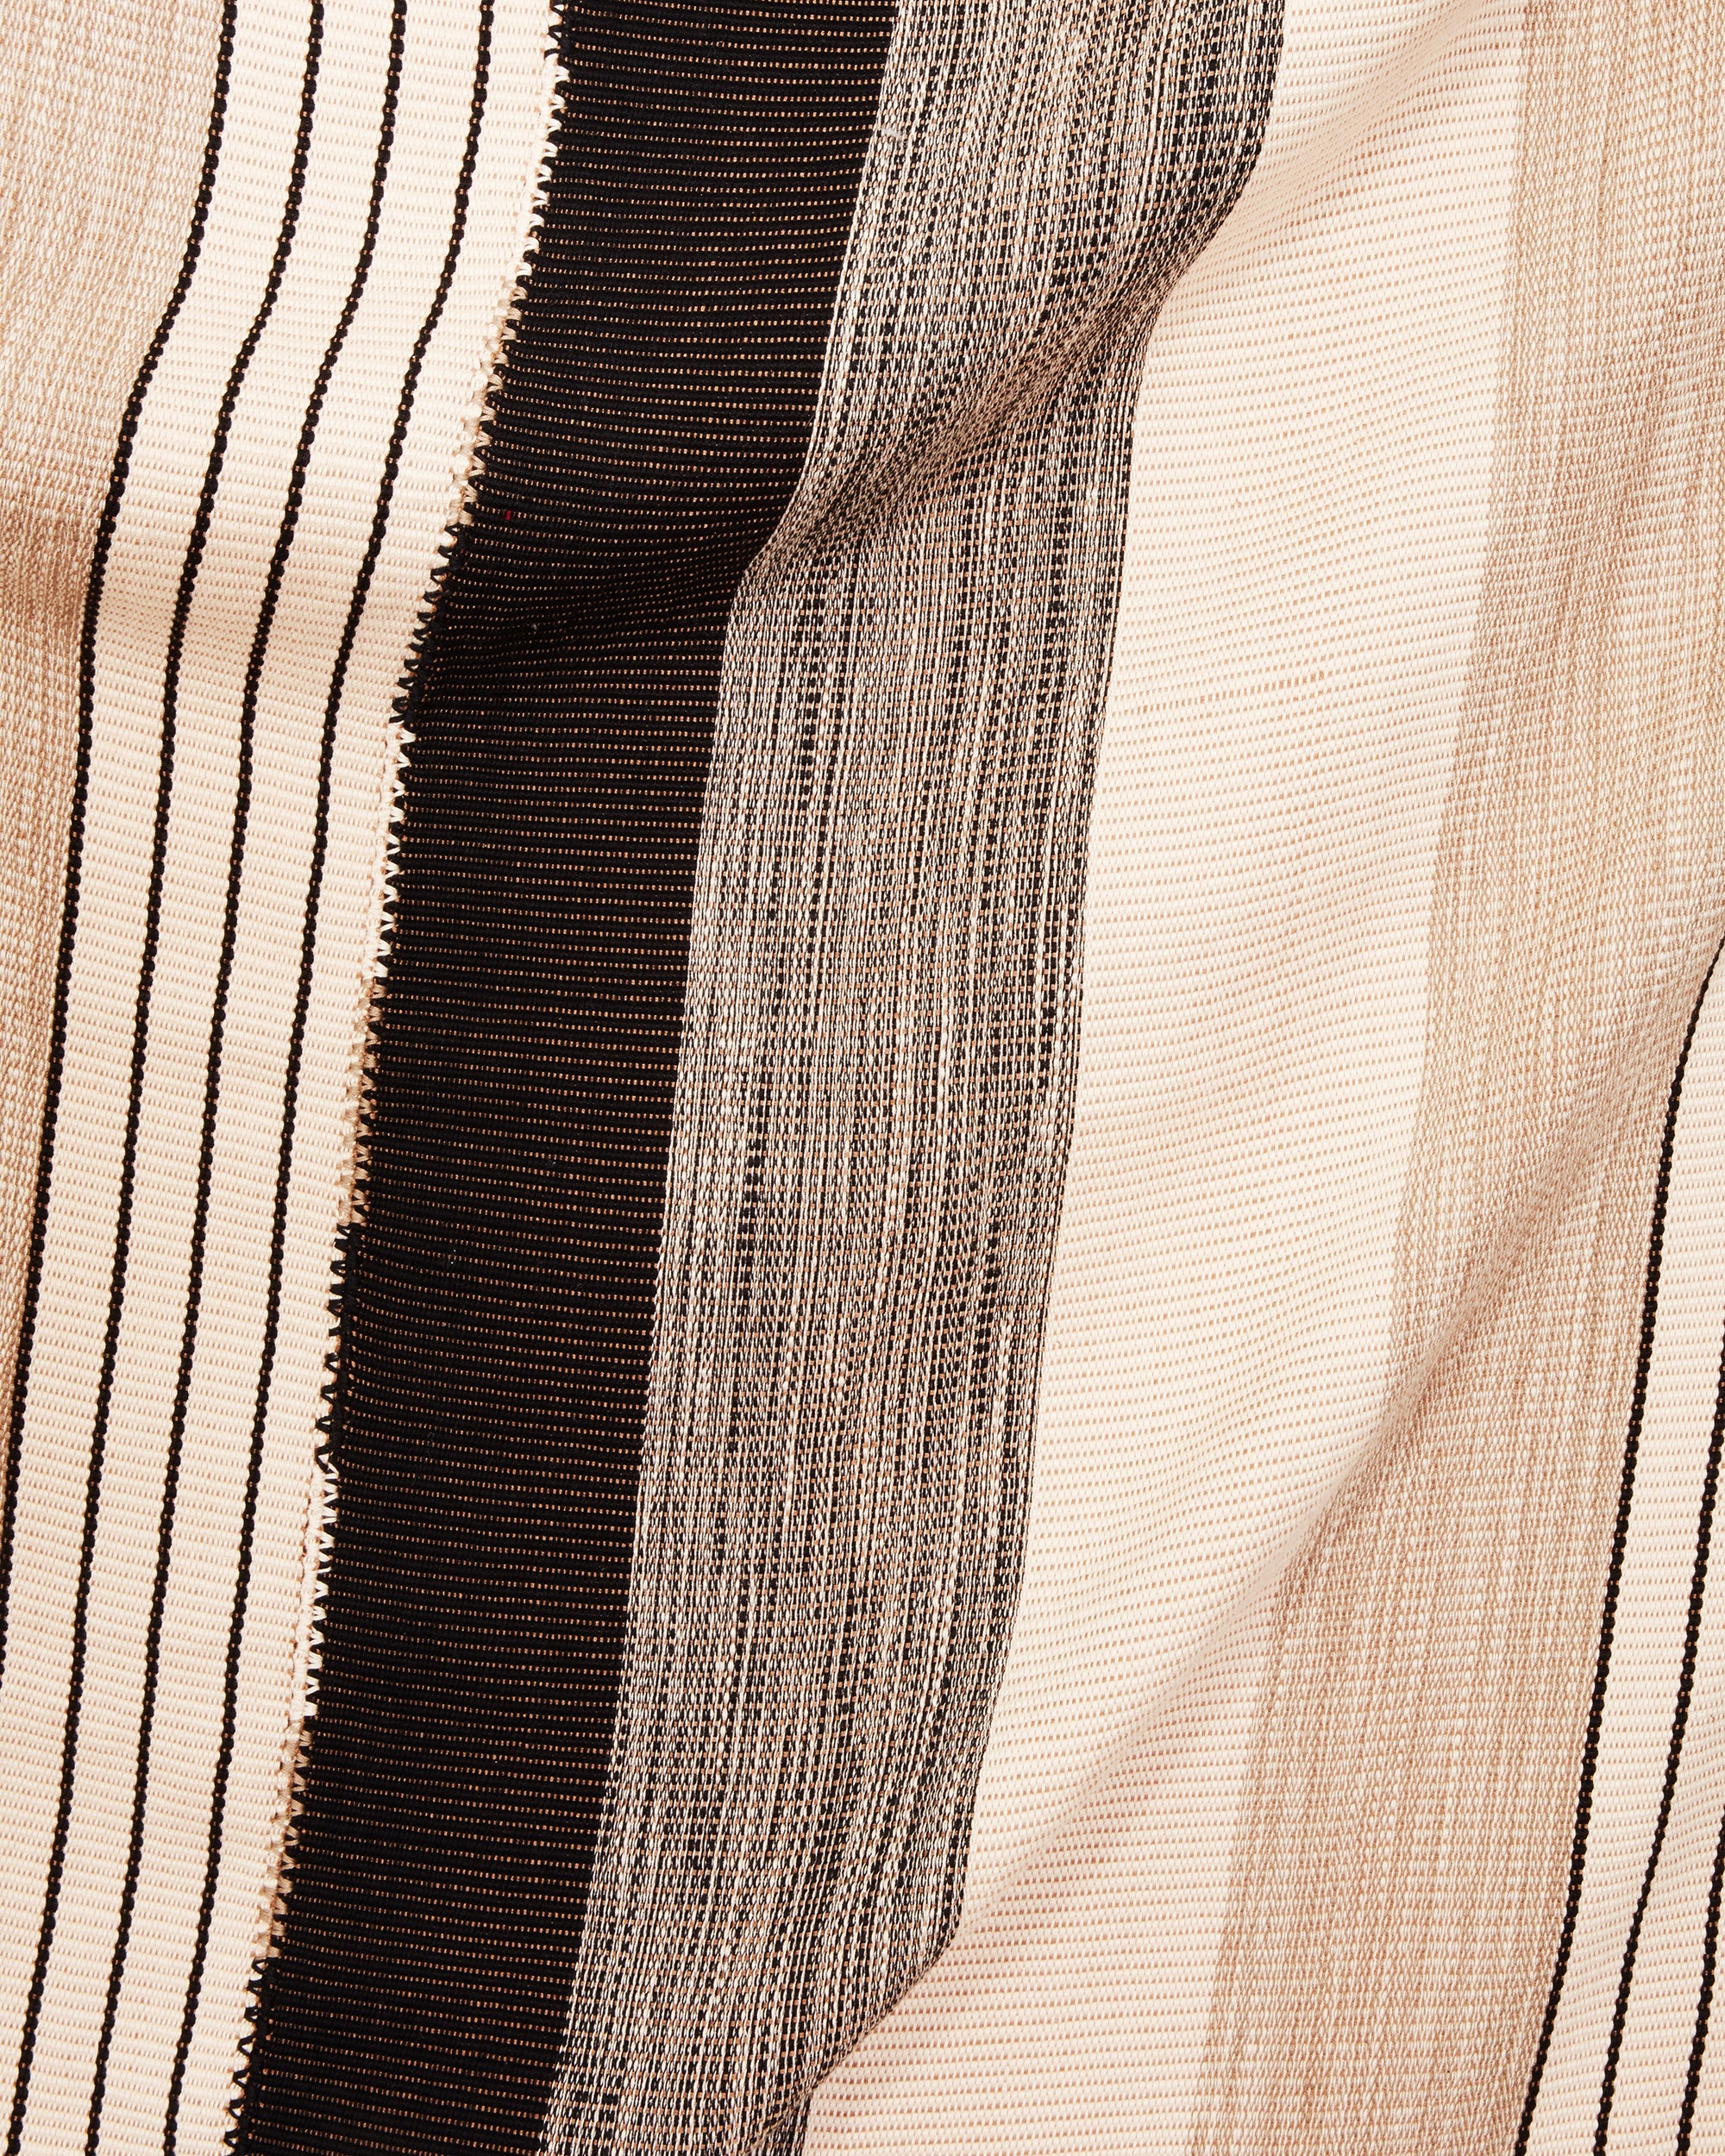 detail of ethically backstrap handwoven cotton MINNA Pantelho Throw striped black, white and beige.  